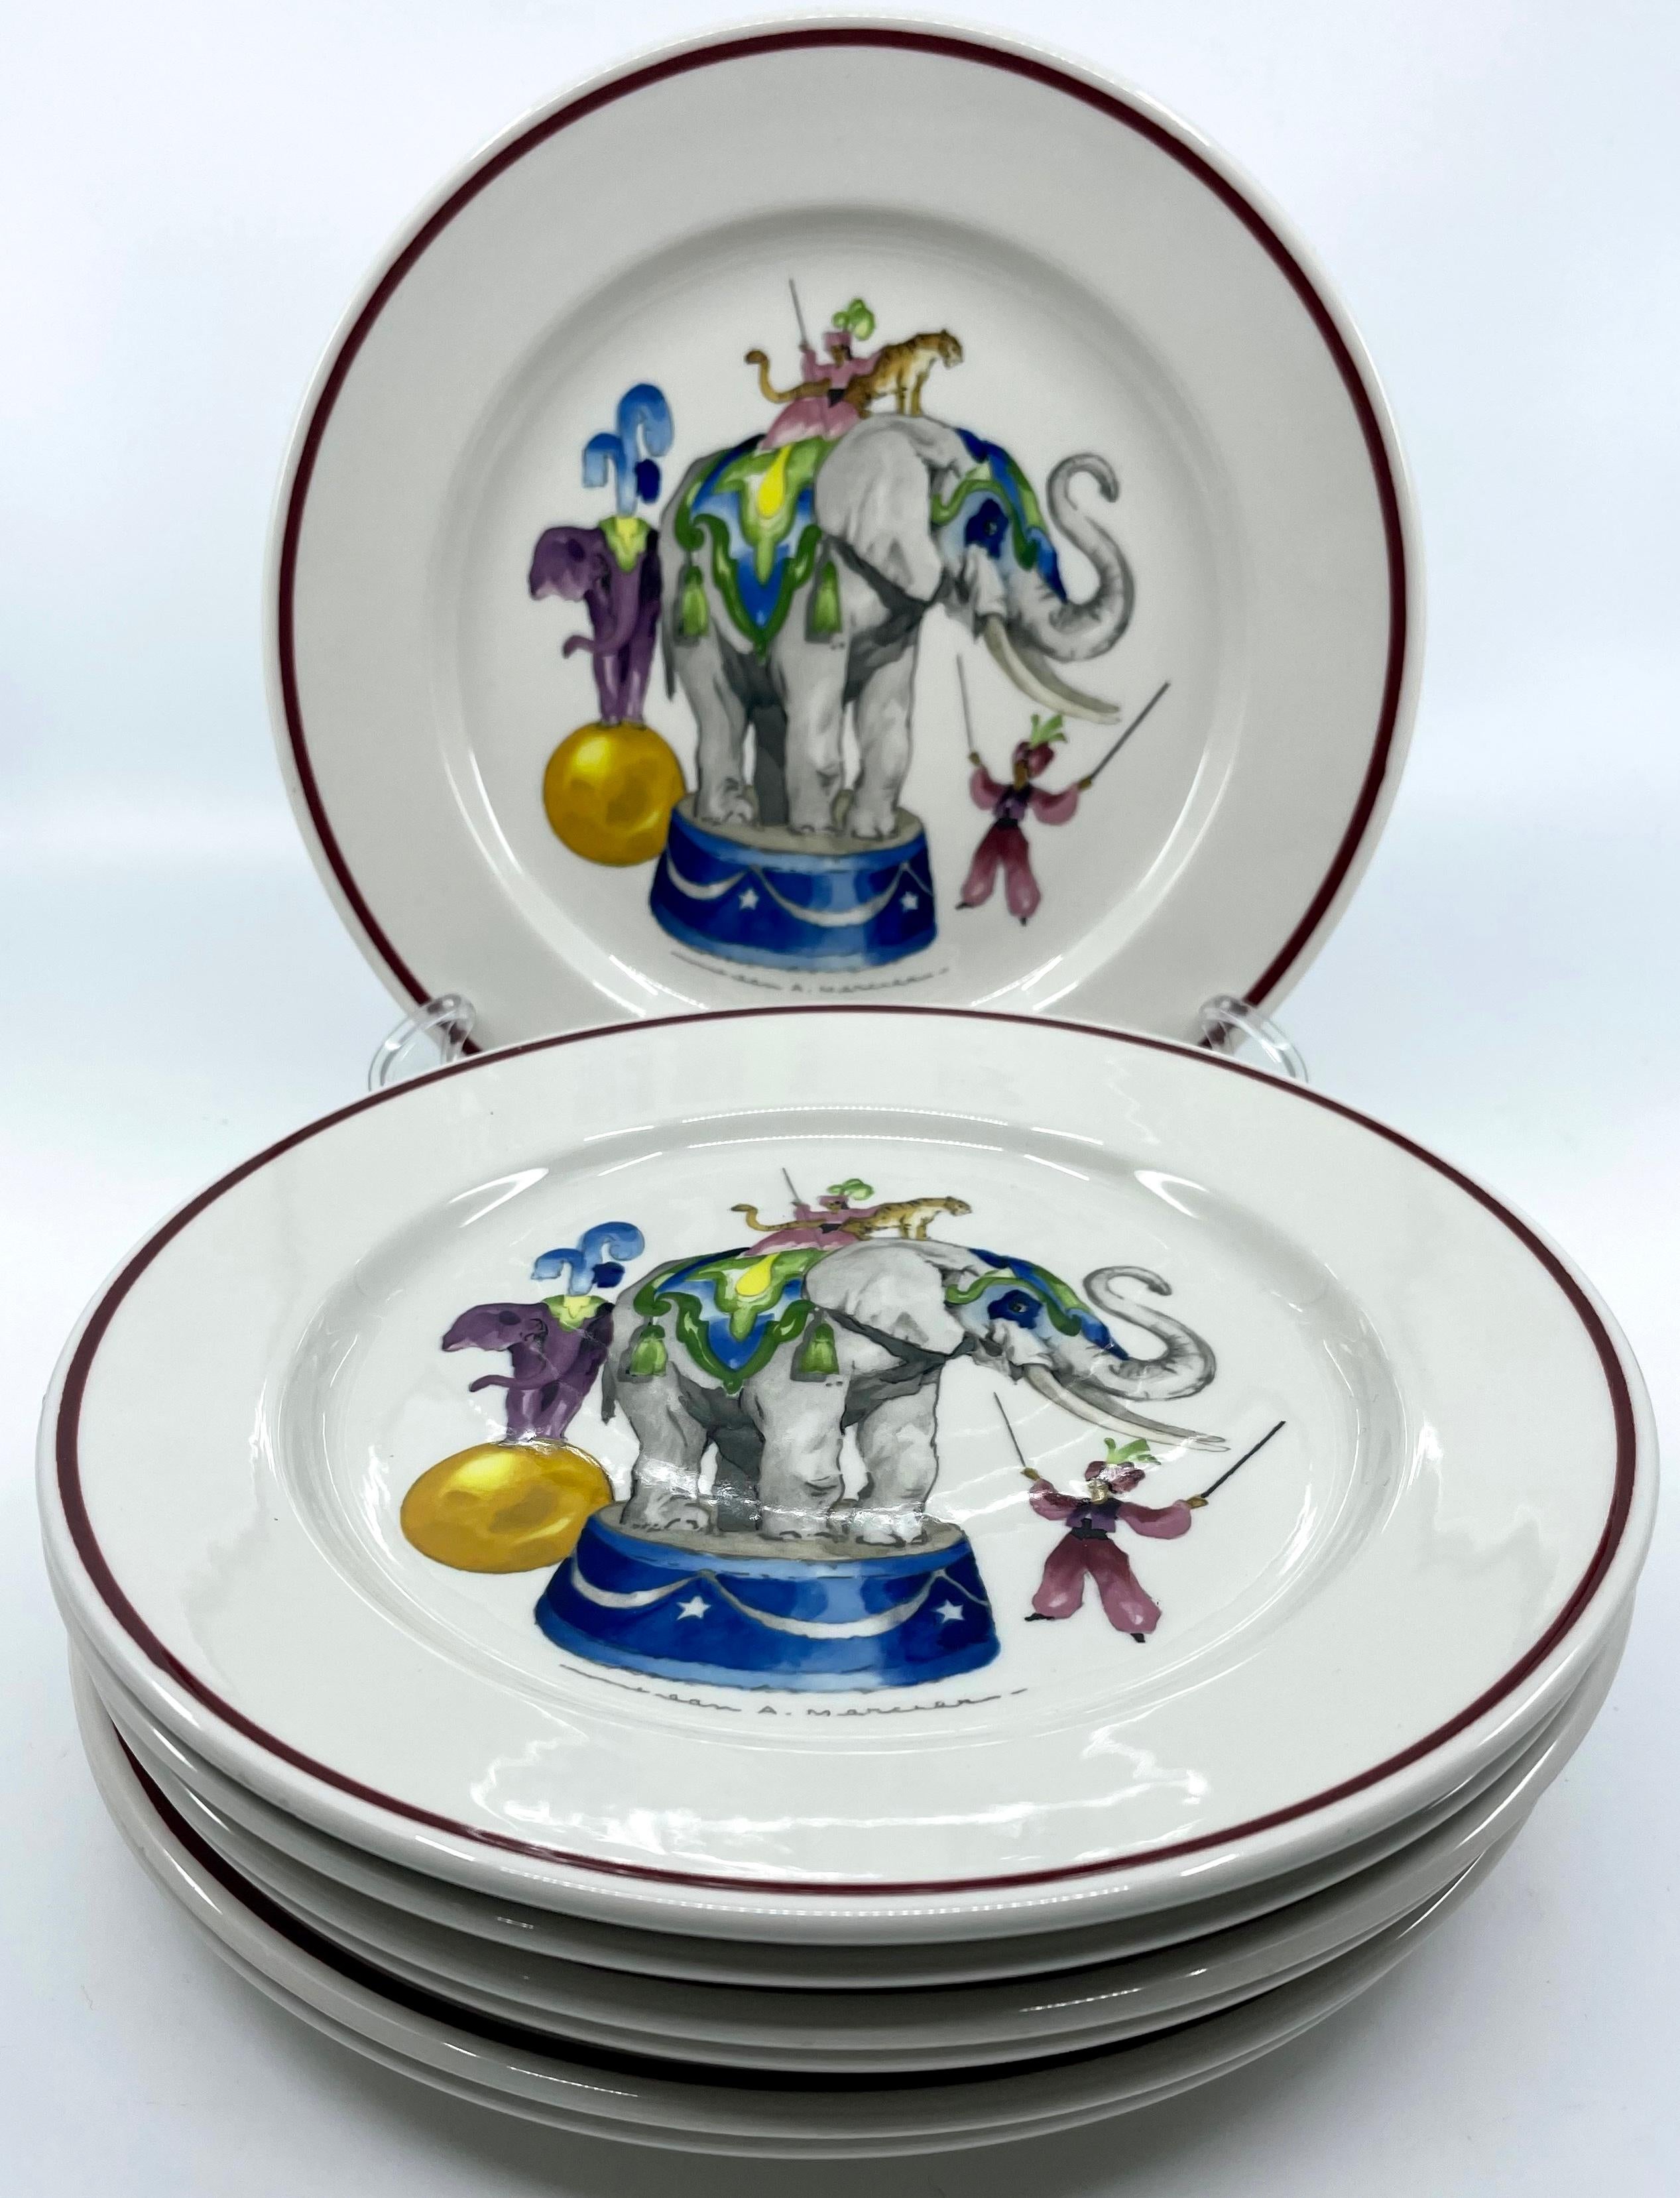 Set of six Le Cirque circus elephant plates. Set of plates in purple, green and various blue tones of elephant in circus with markings for Villeroy and Boch. Luxembourg, 20th century. 
Dimensions: 8.25